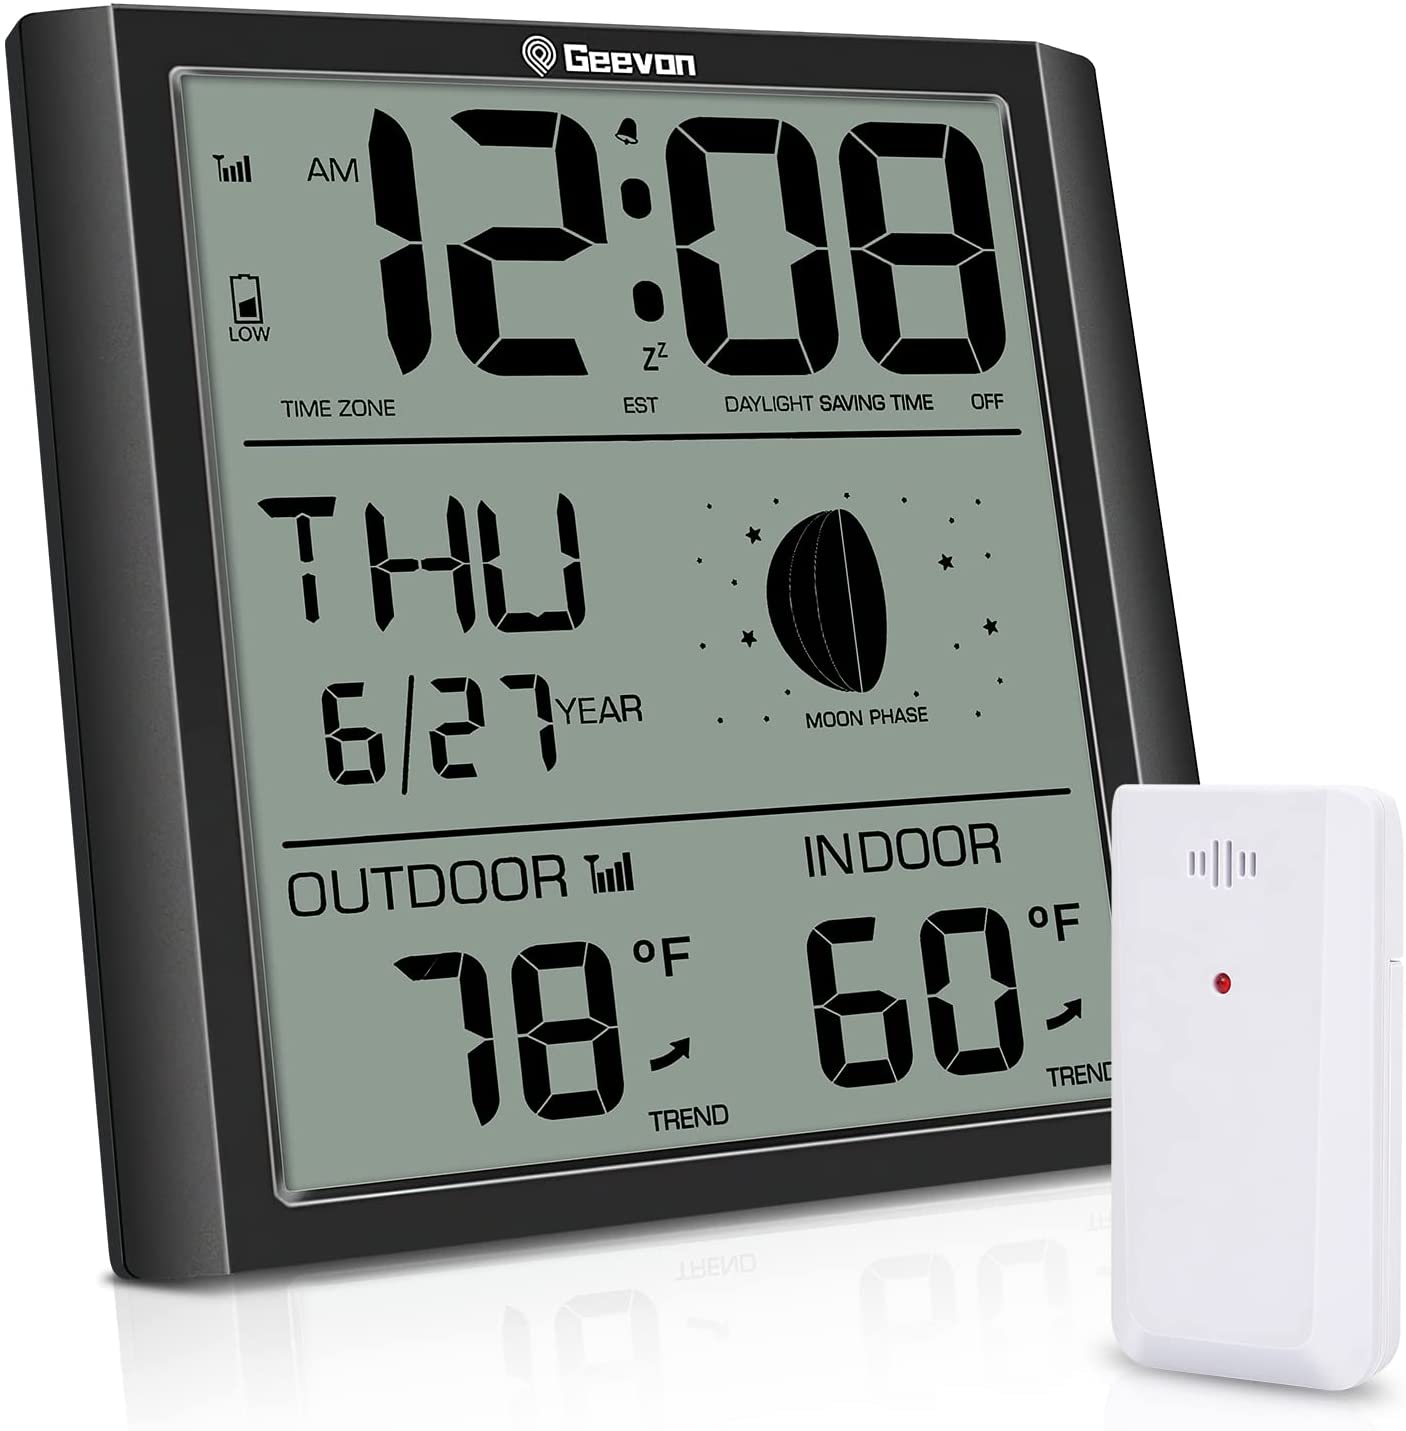 How to Choose an Indoor/Outdoor Digital Thermometer and Hygrometer